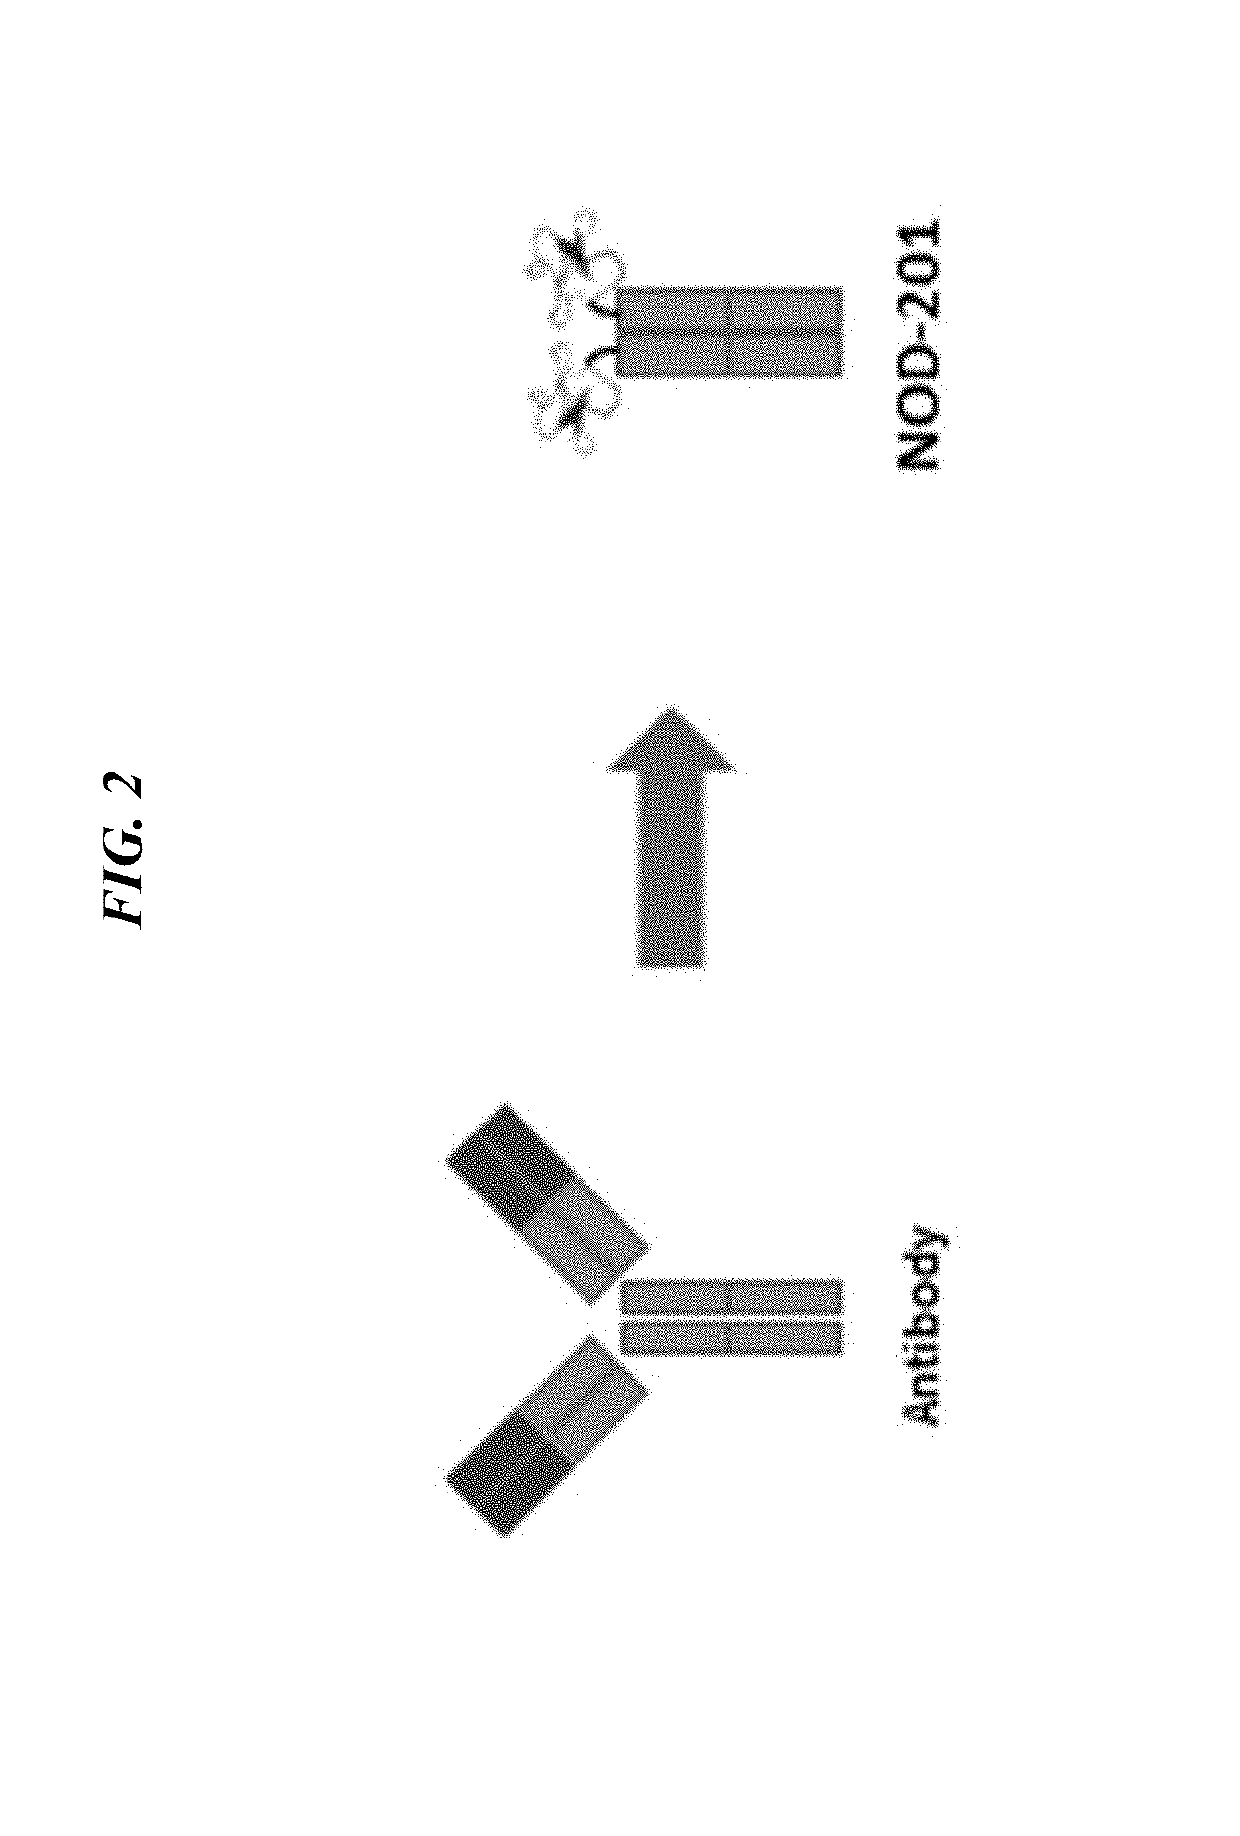 Method of treating cancer with a multiple integrin binding Fc fusion protein